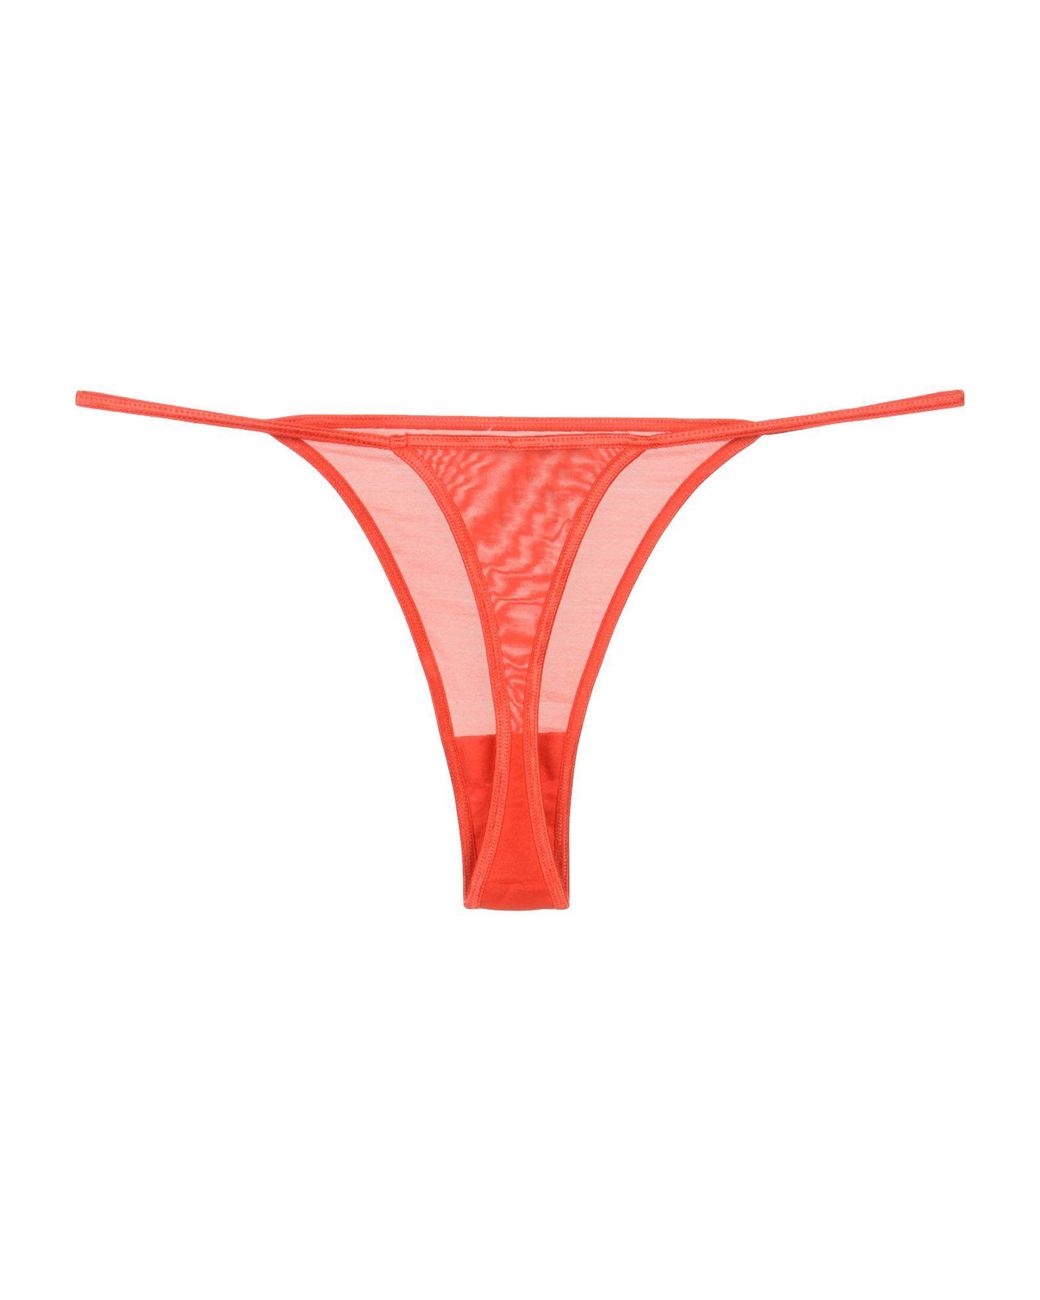 Gucci G-string in Red